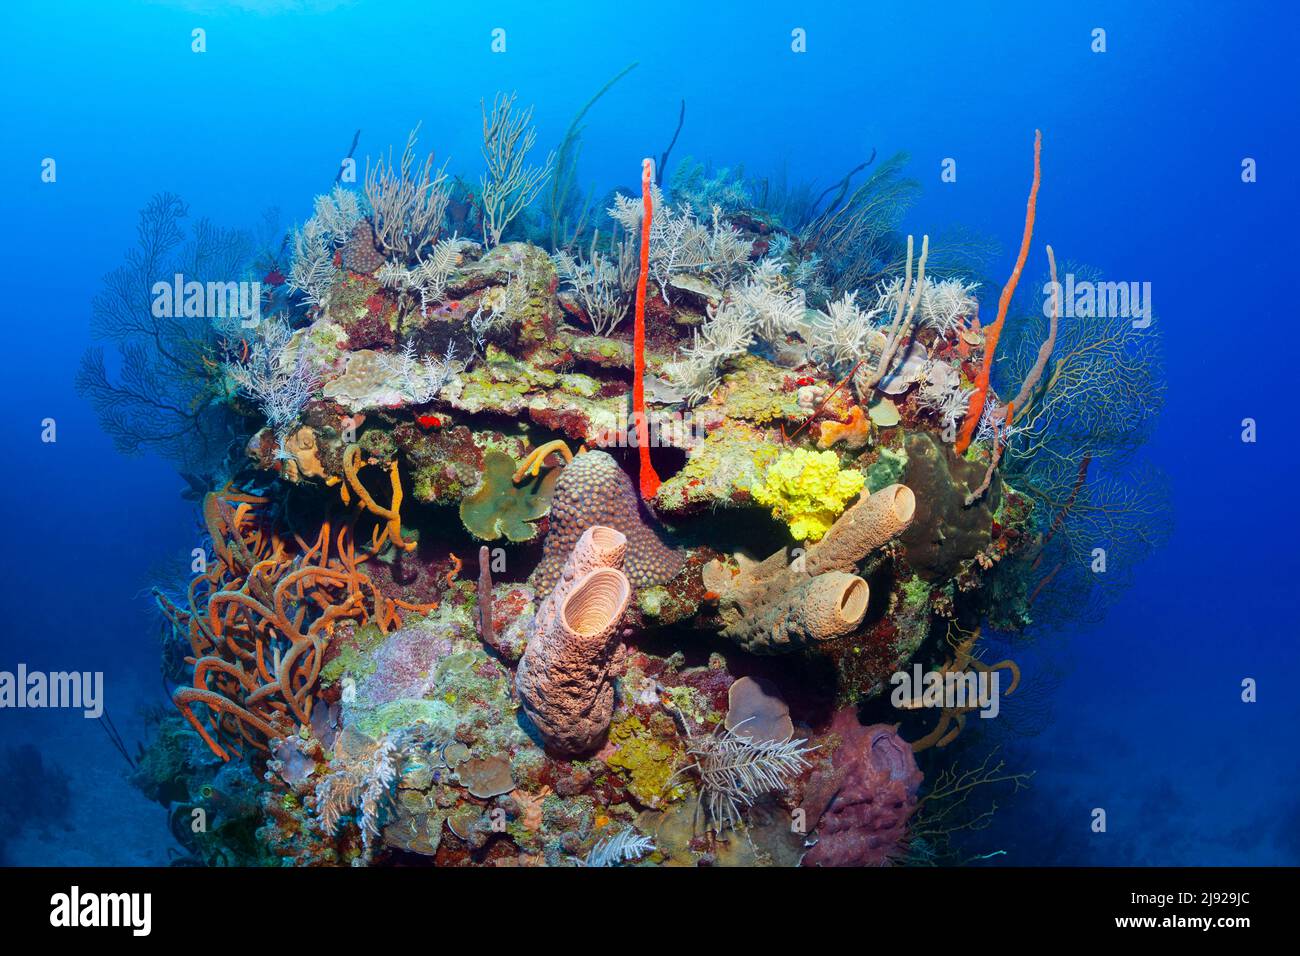 Typical Caribbean coral (Octocorallia) reef, large coral block with various sponge (Porifera) and stony coral (Scleractinia), Caribbean Sea, Santiago Stock Photo